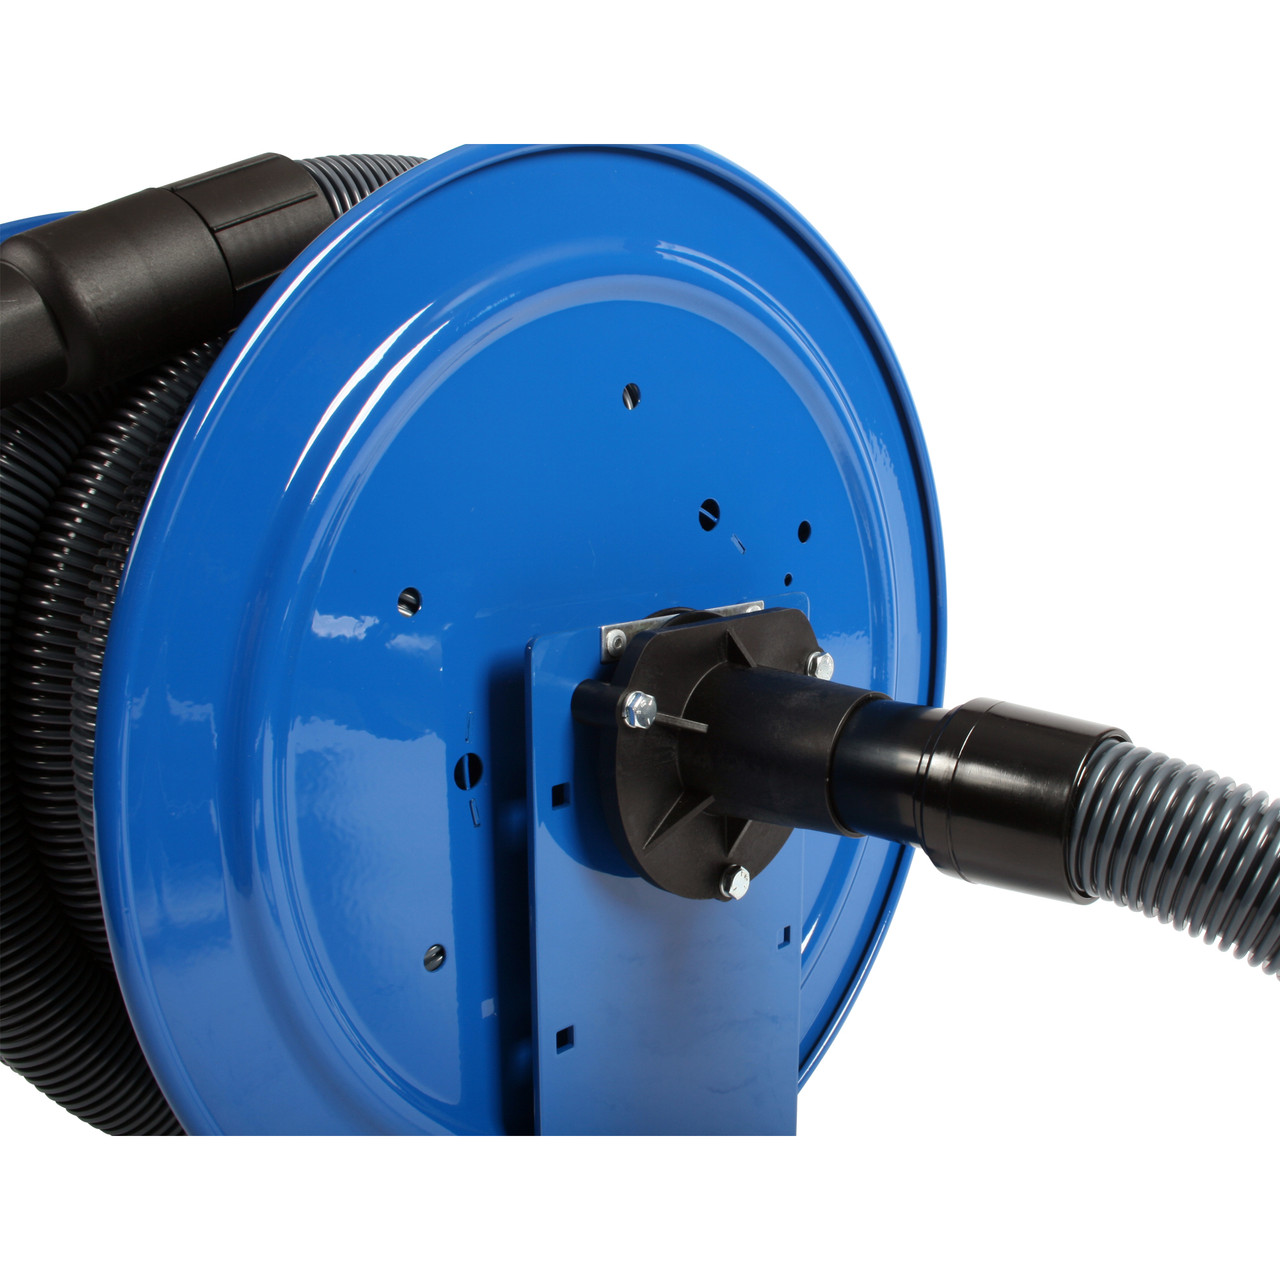 Industrial Grade Steel Hose Reel and Wet/Dry Vacuum Attachment Set -  Cen-Tec Systems